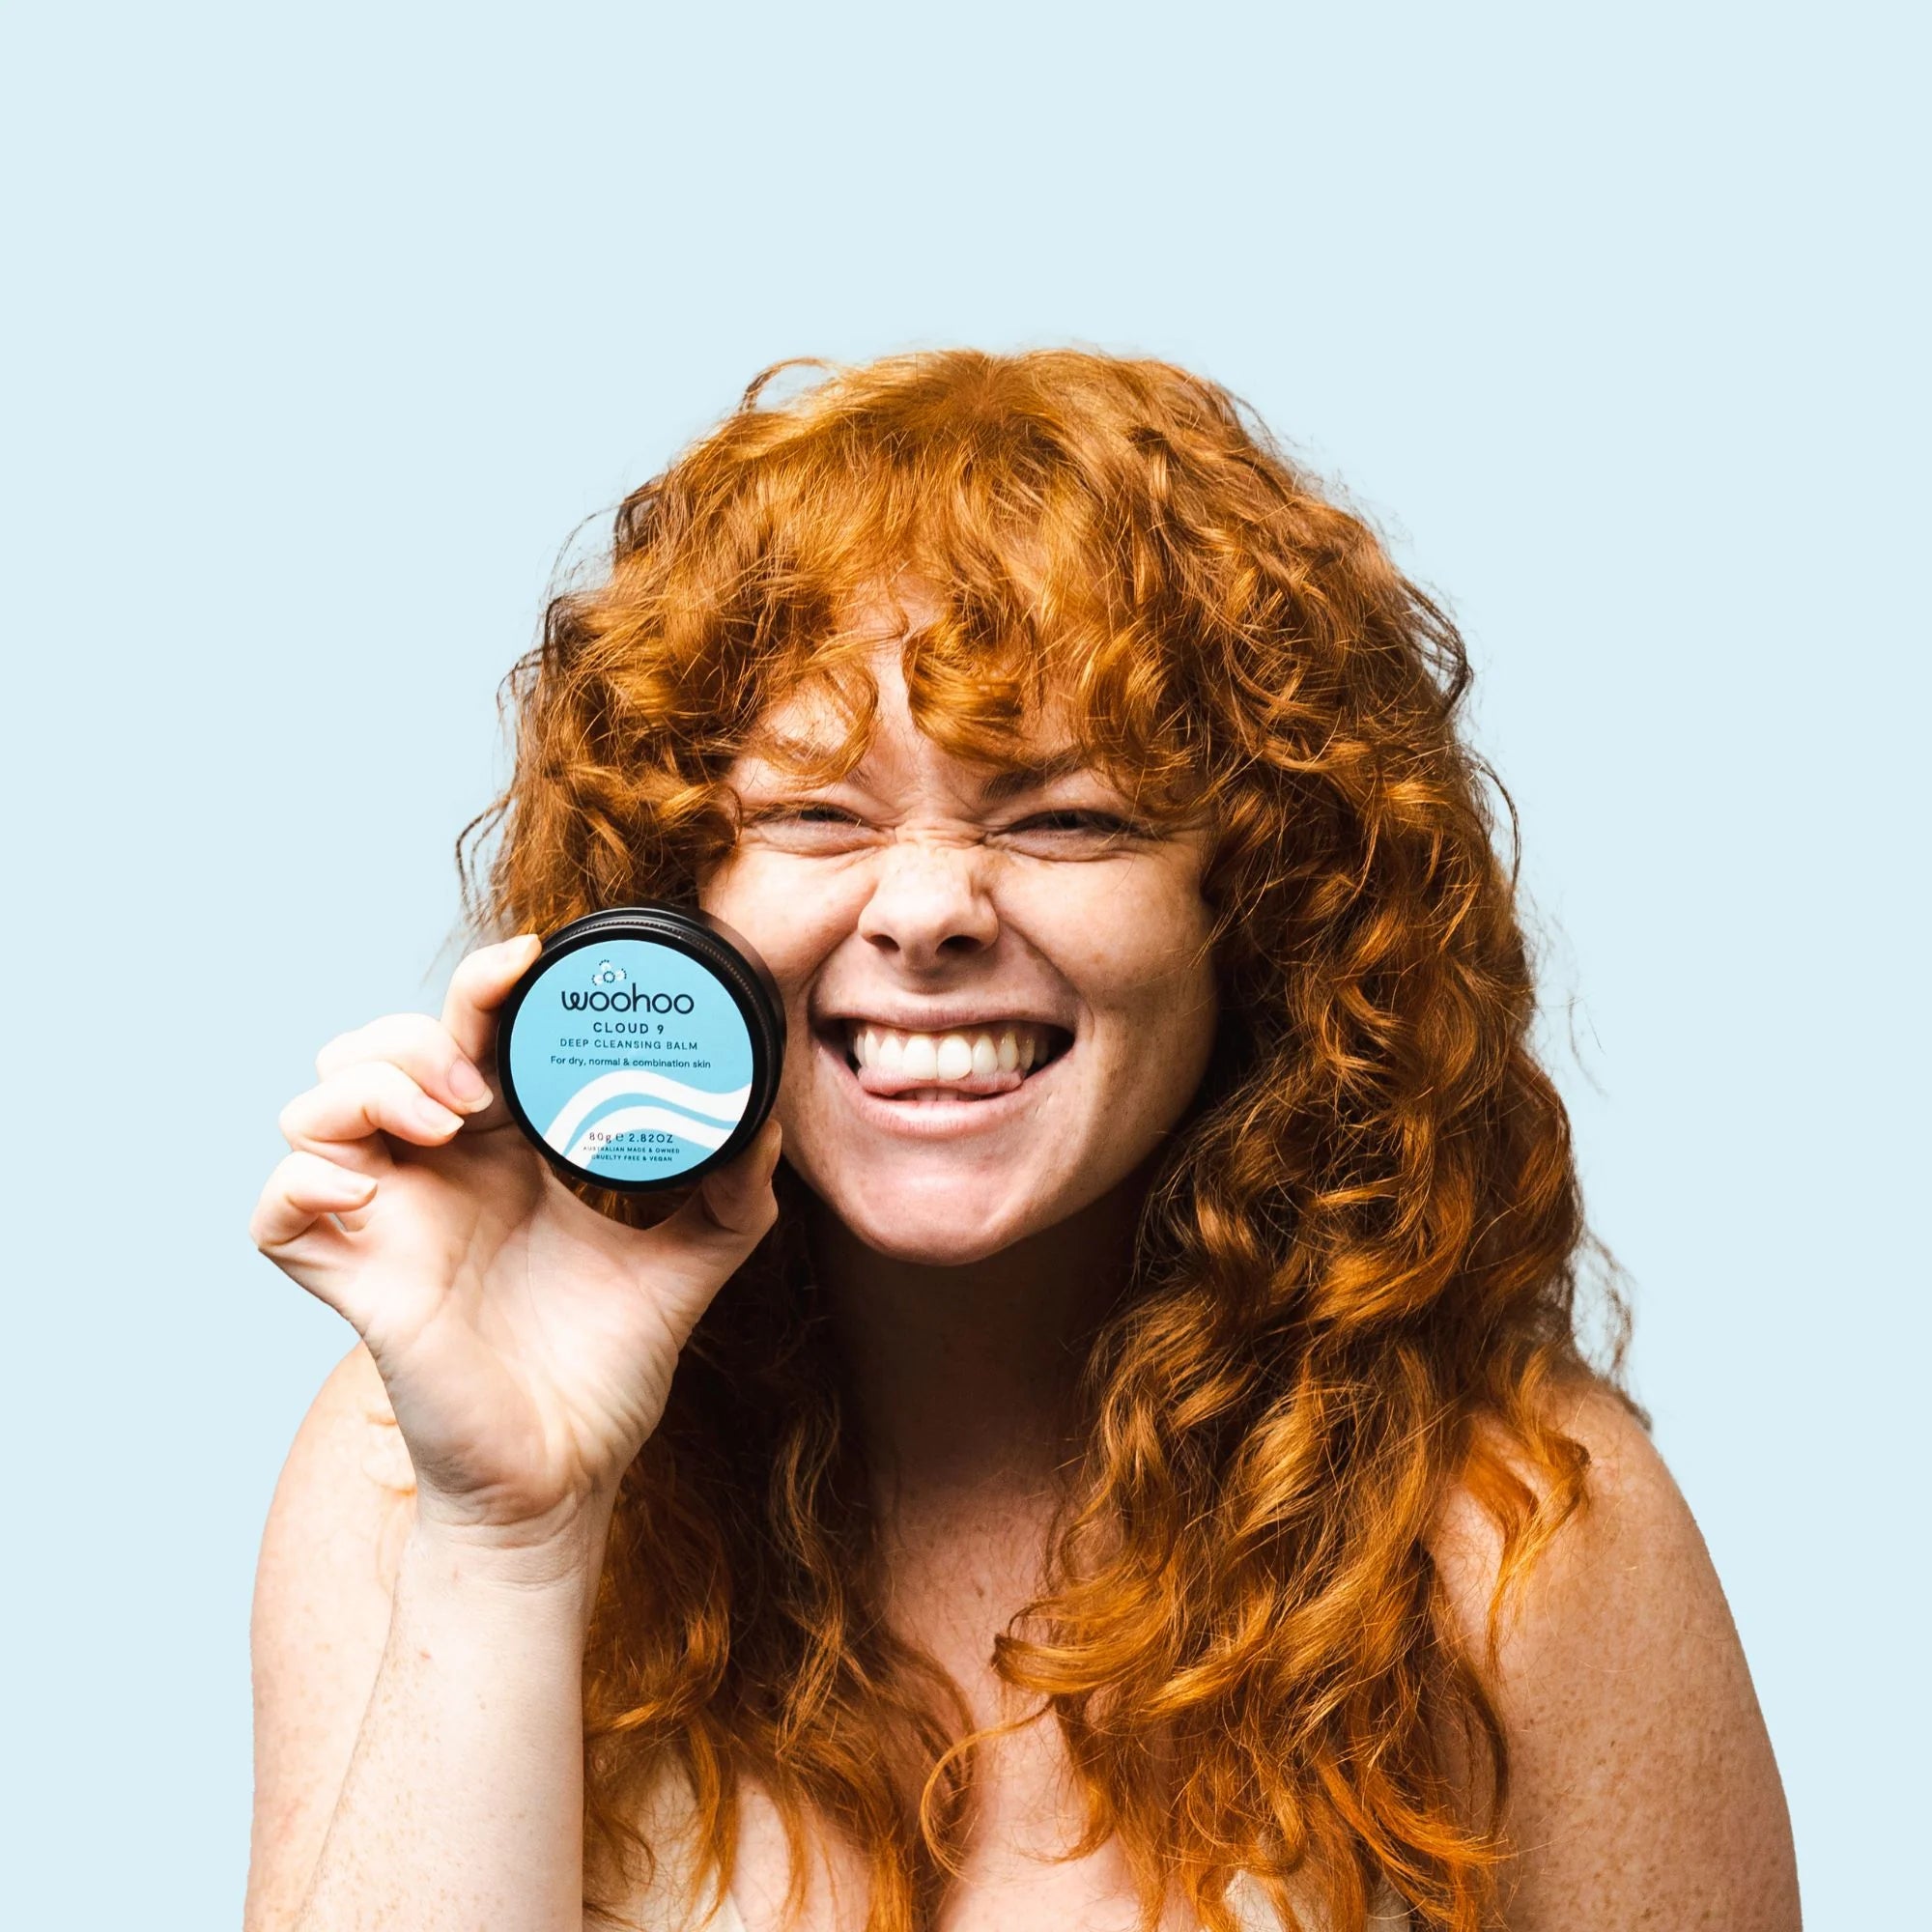 Image of a redheaded woman holding the Woohoo Cloud 9 Deep Cleansing Balm Tin next to her face as she is smiling at the camera.